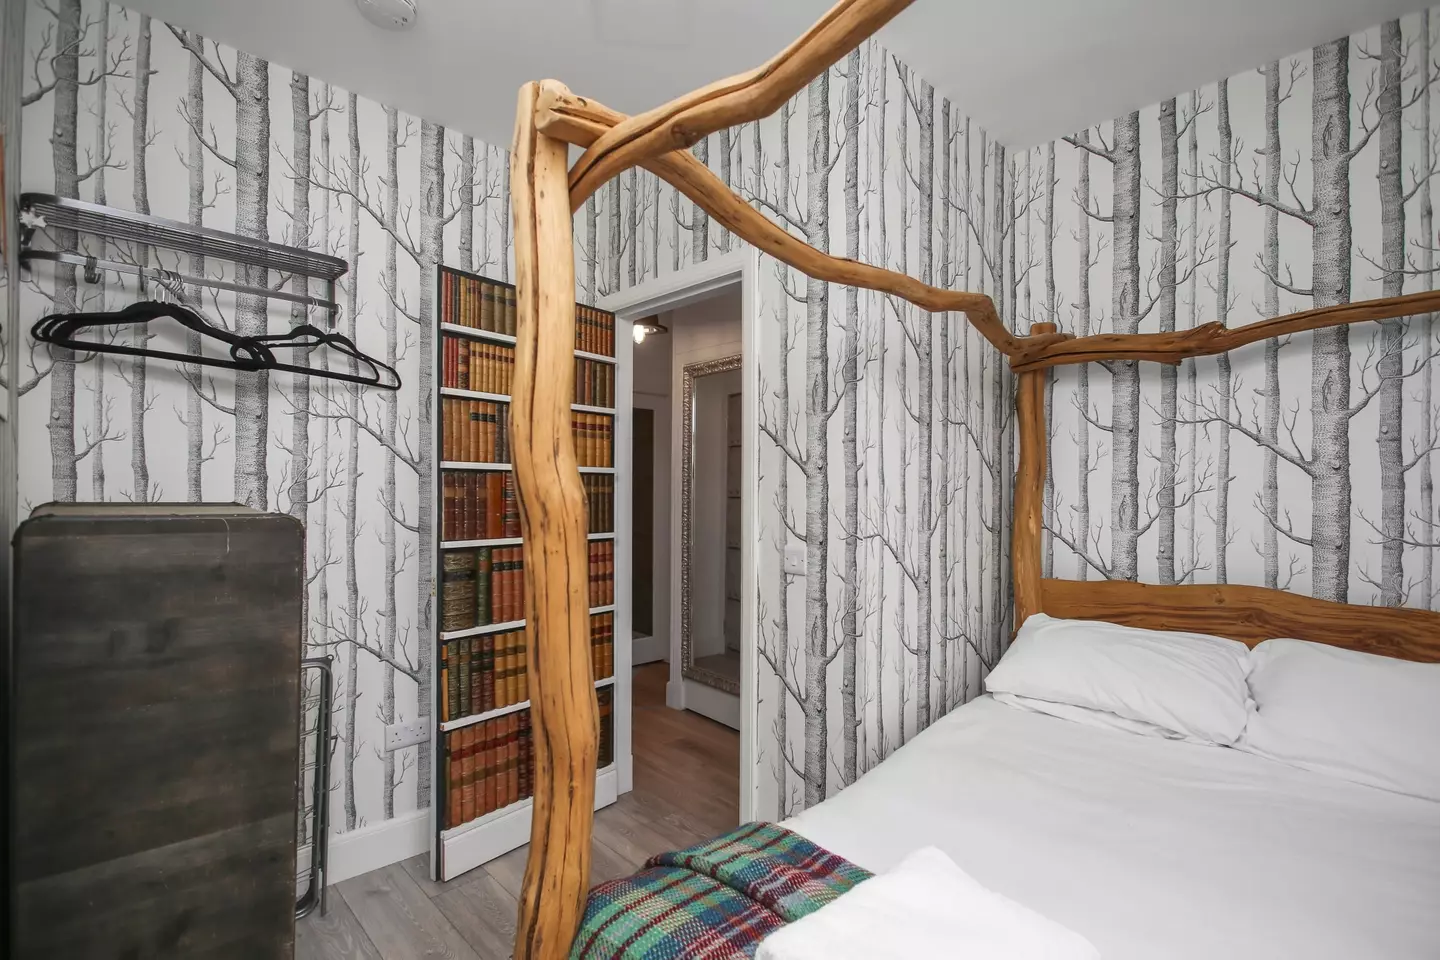 A Harry Potter themed flat is on the market in Edinburgh (